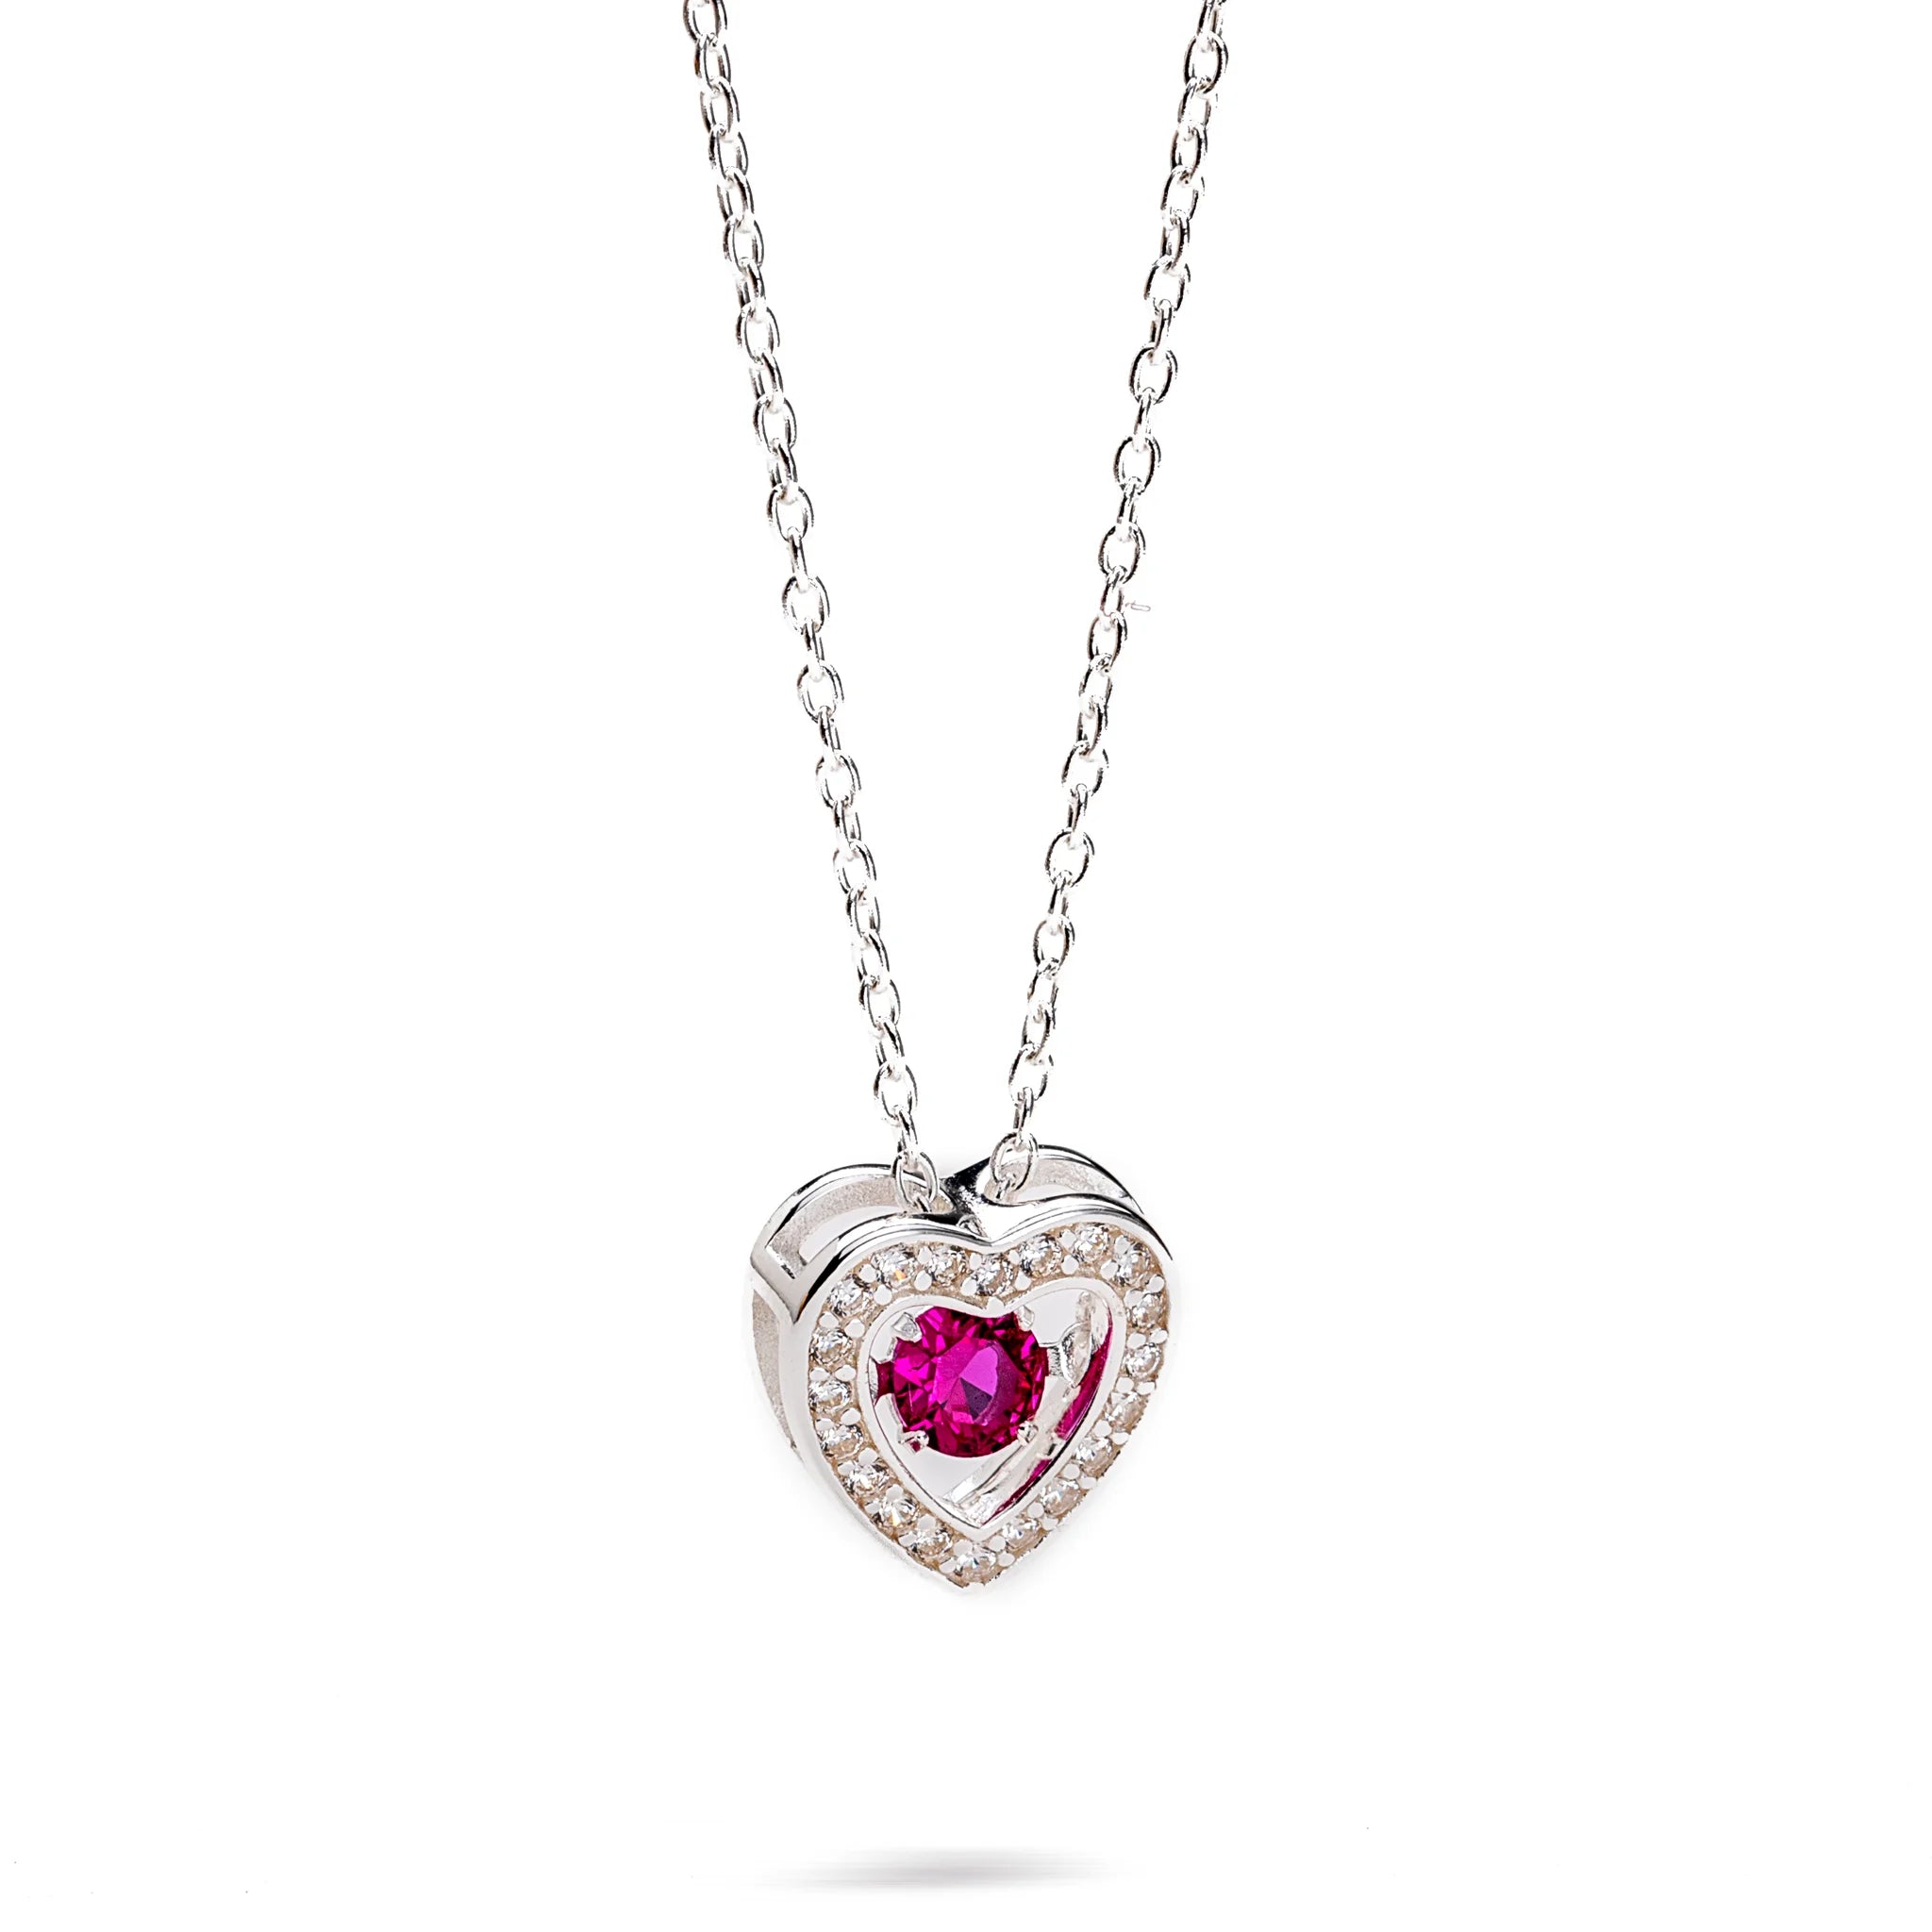 The Lieze Birth Stone Sterling Silver Heart Necklace N303